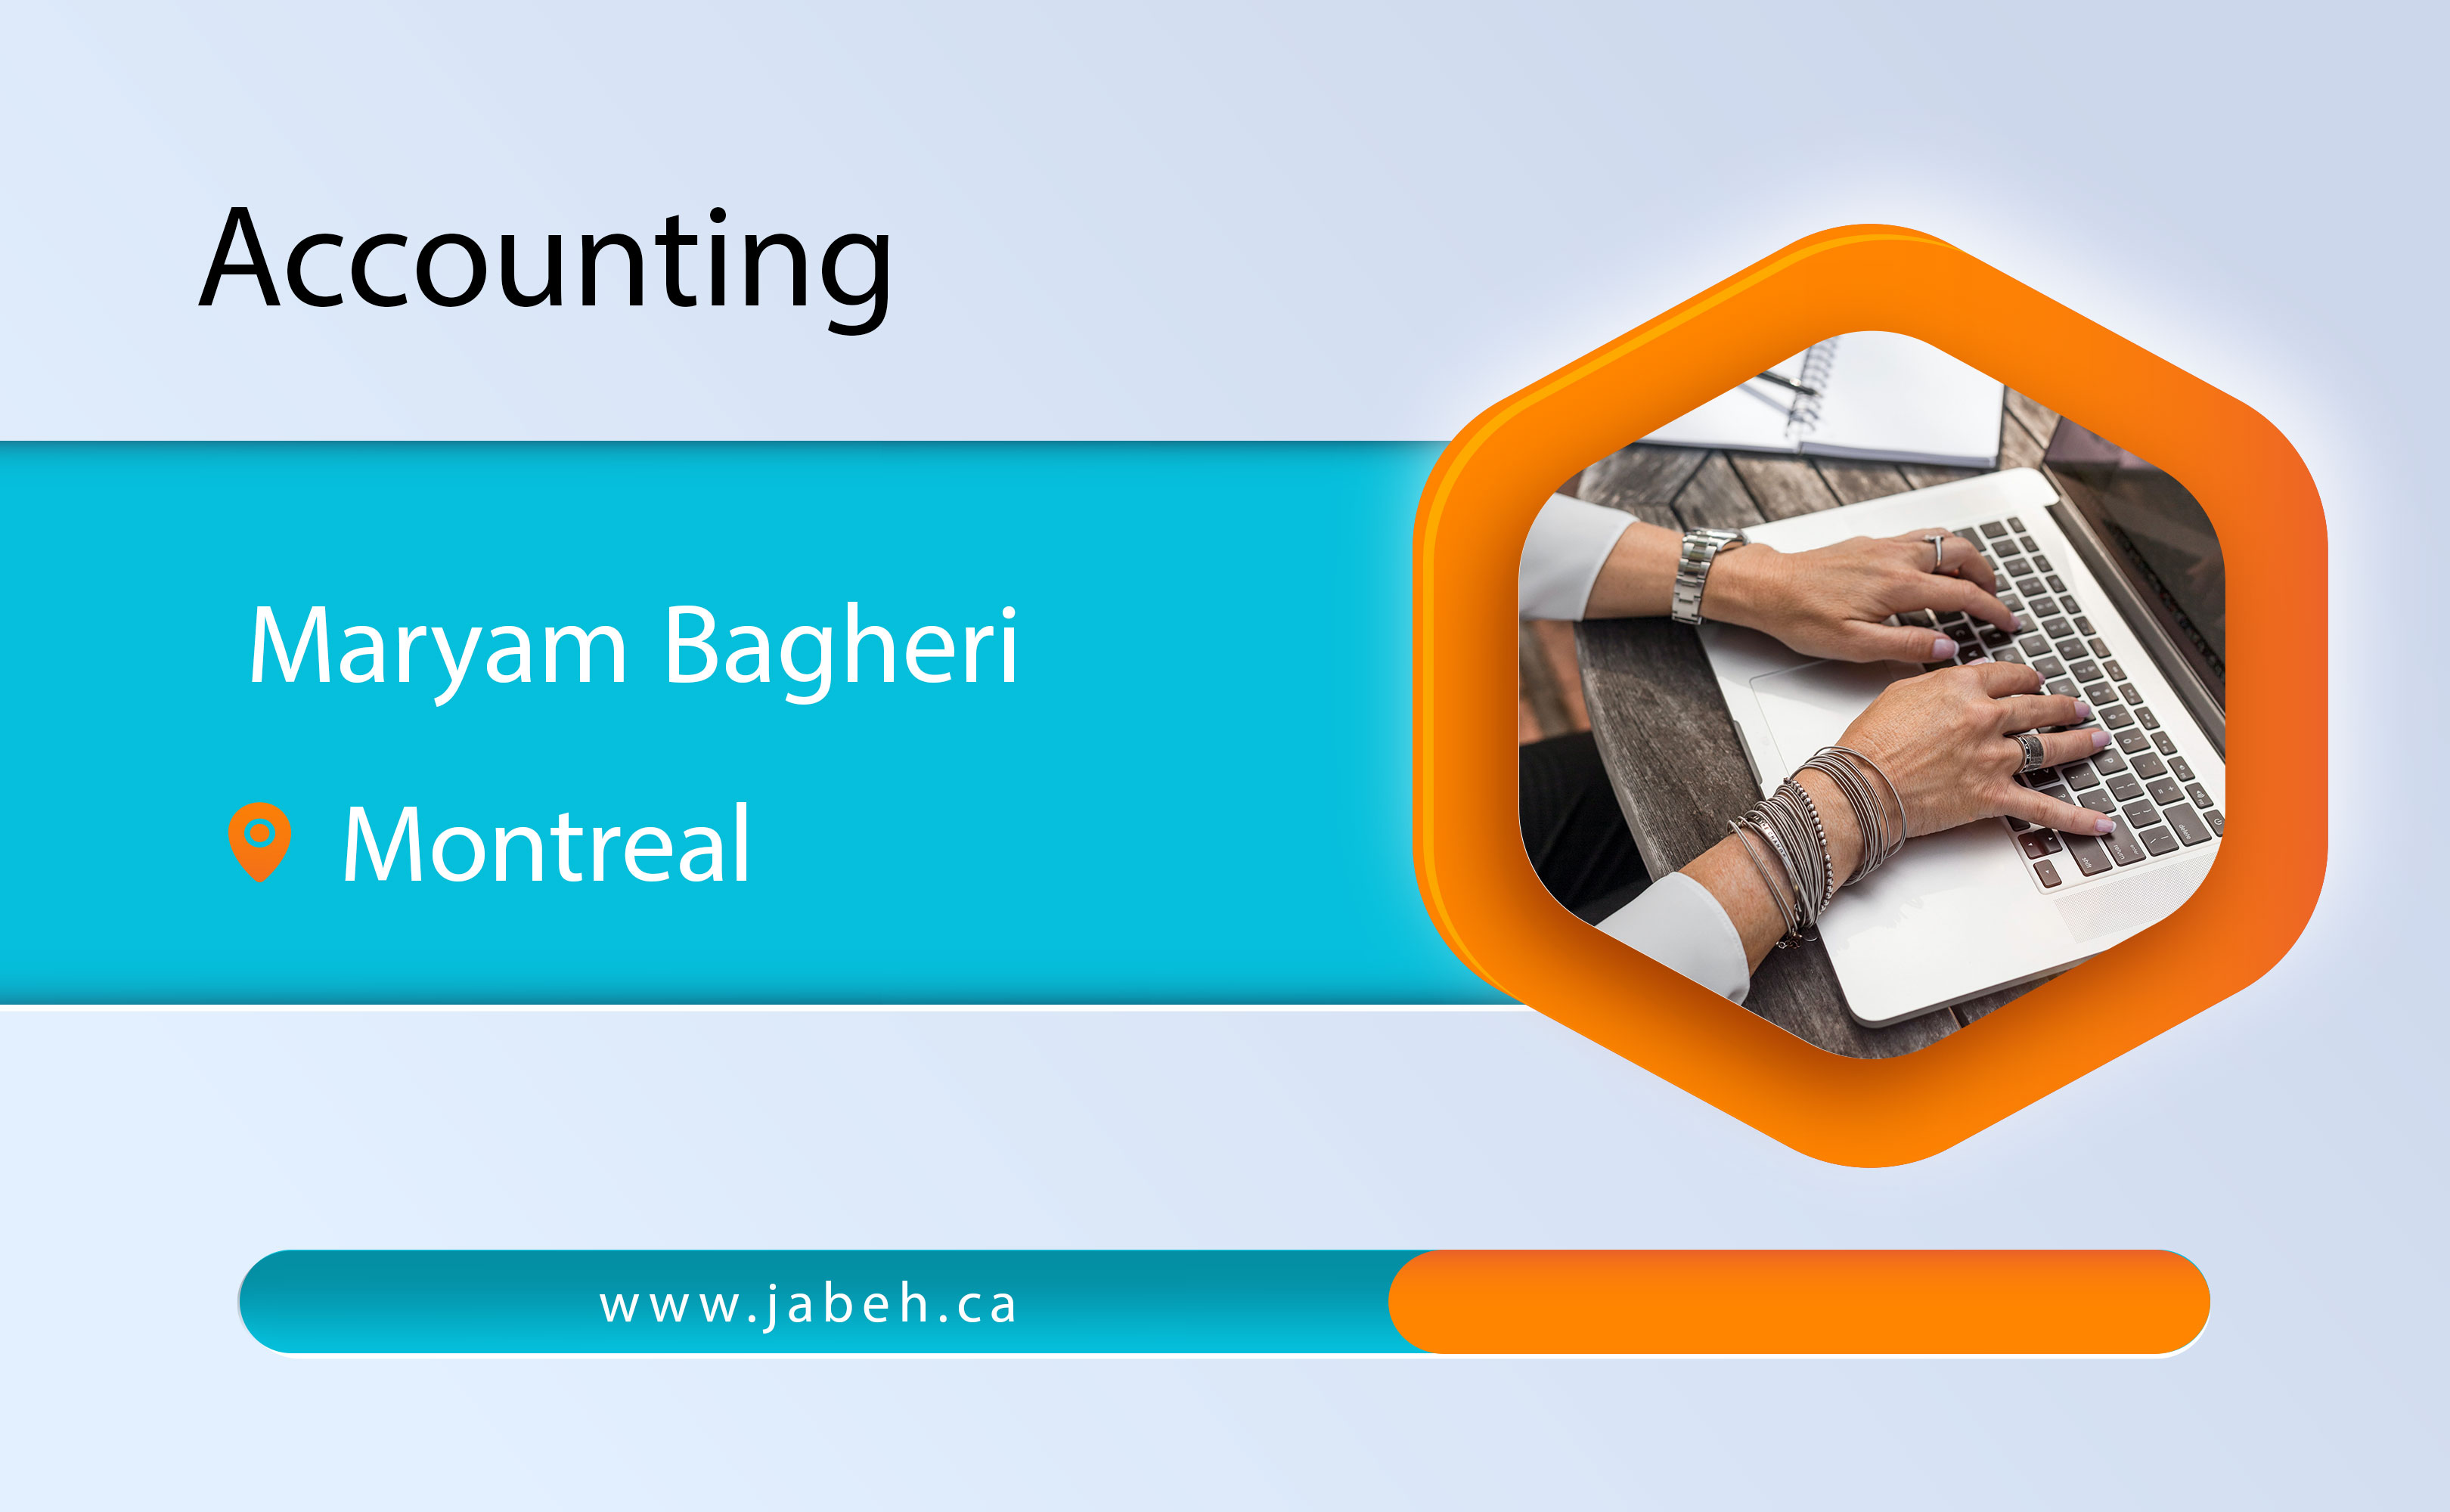 Maryam Bagheri's accounting affairs in Montreal